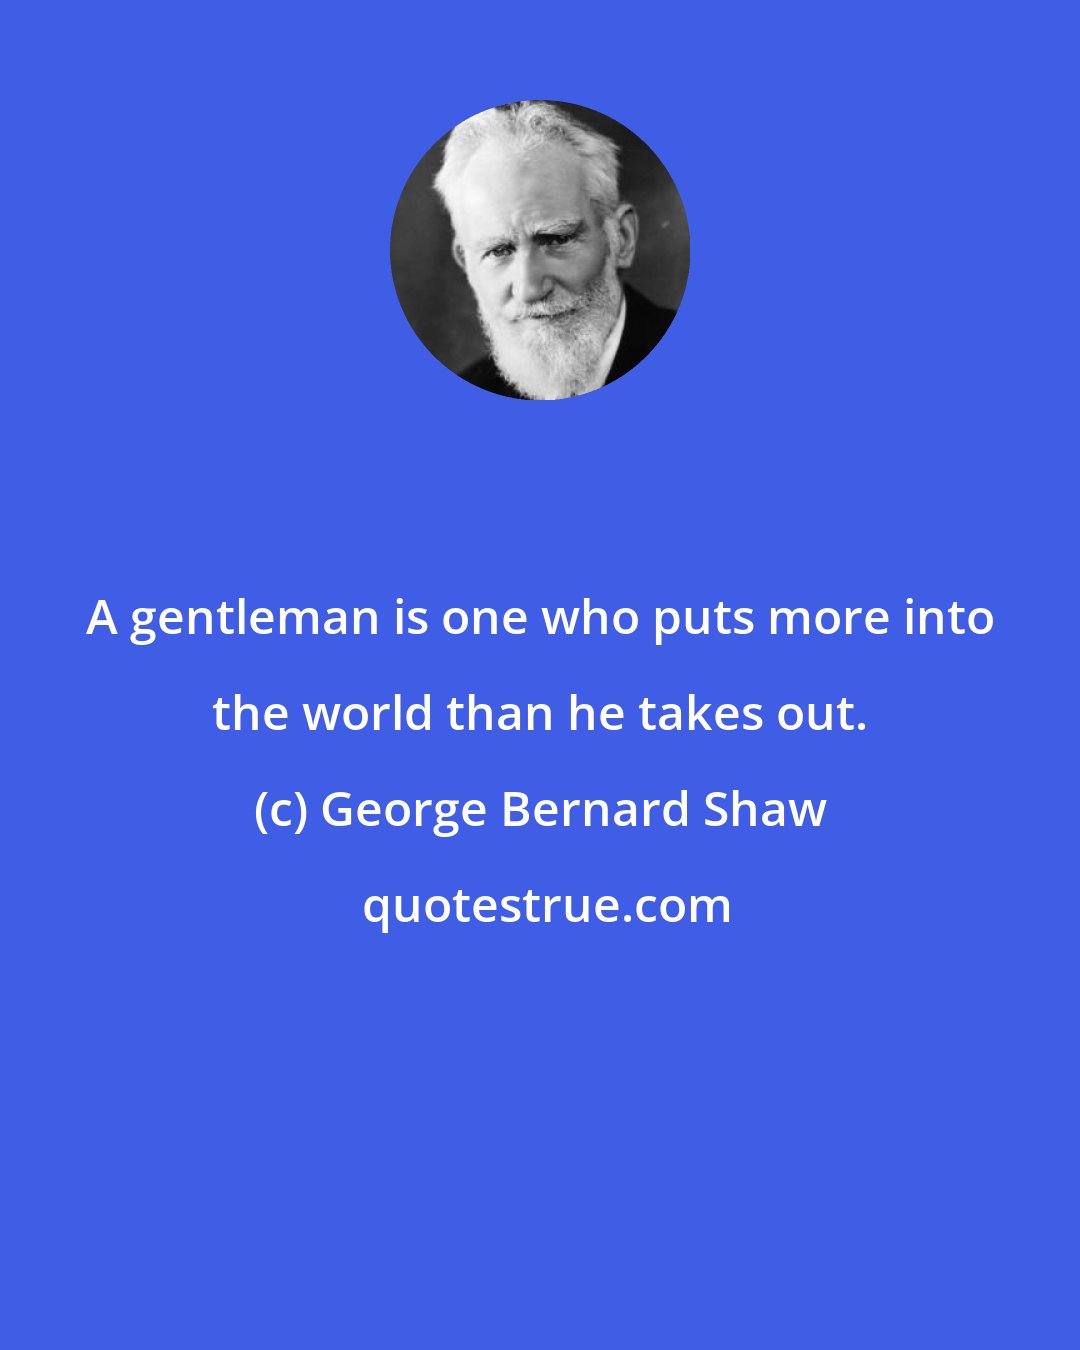 George Bernard Shaw: A gentleman is one who puts more into the world than he takes out.